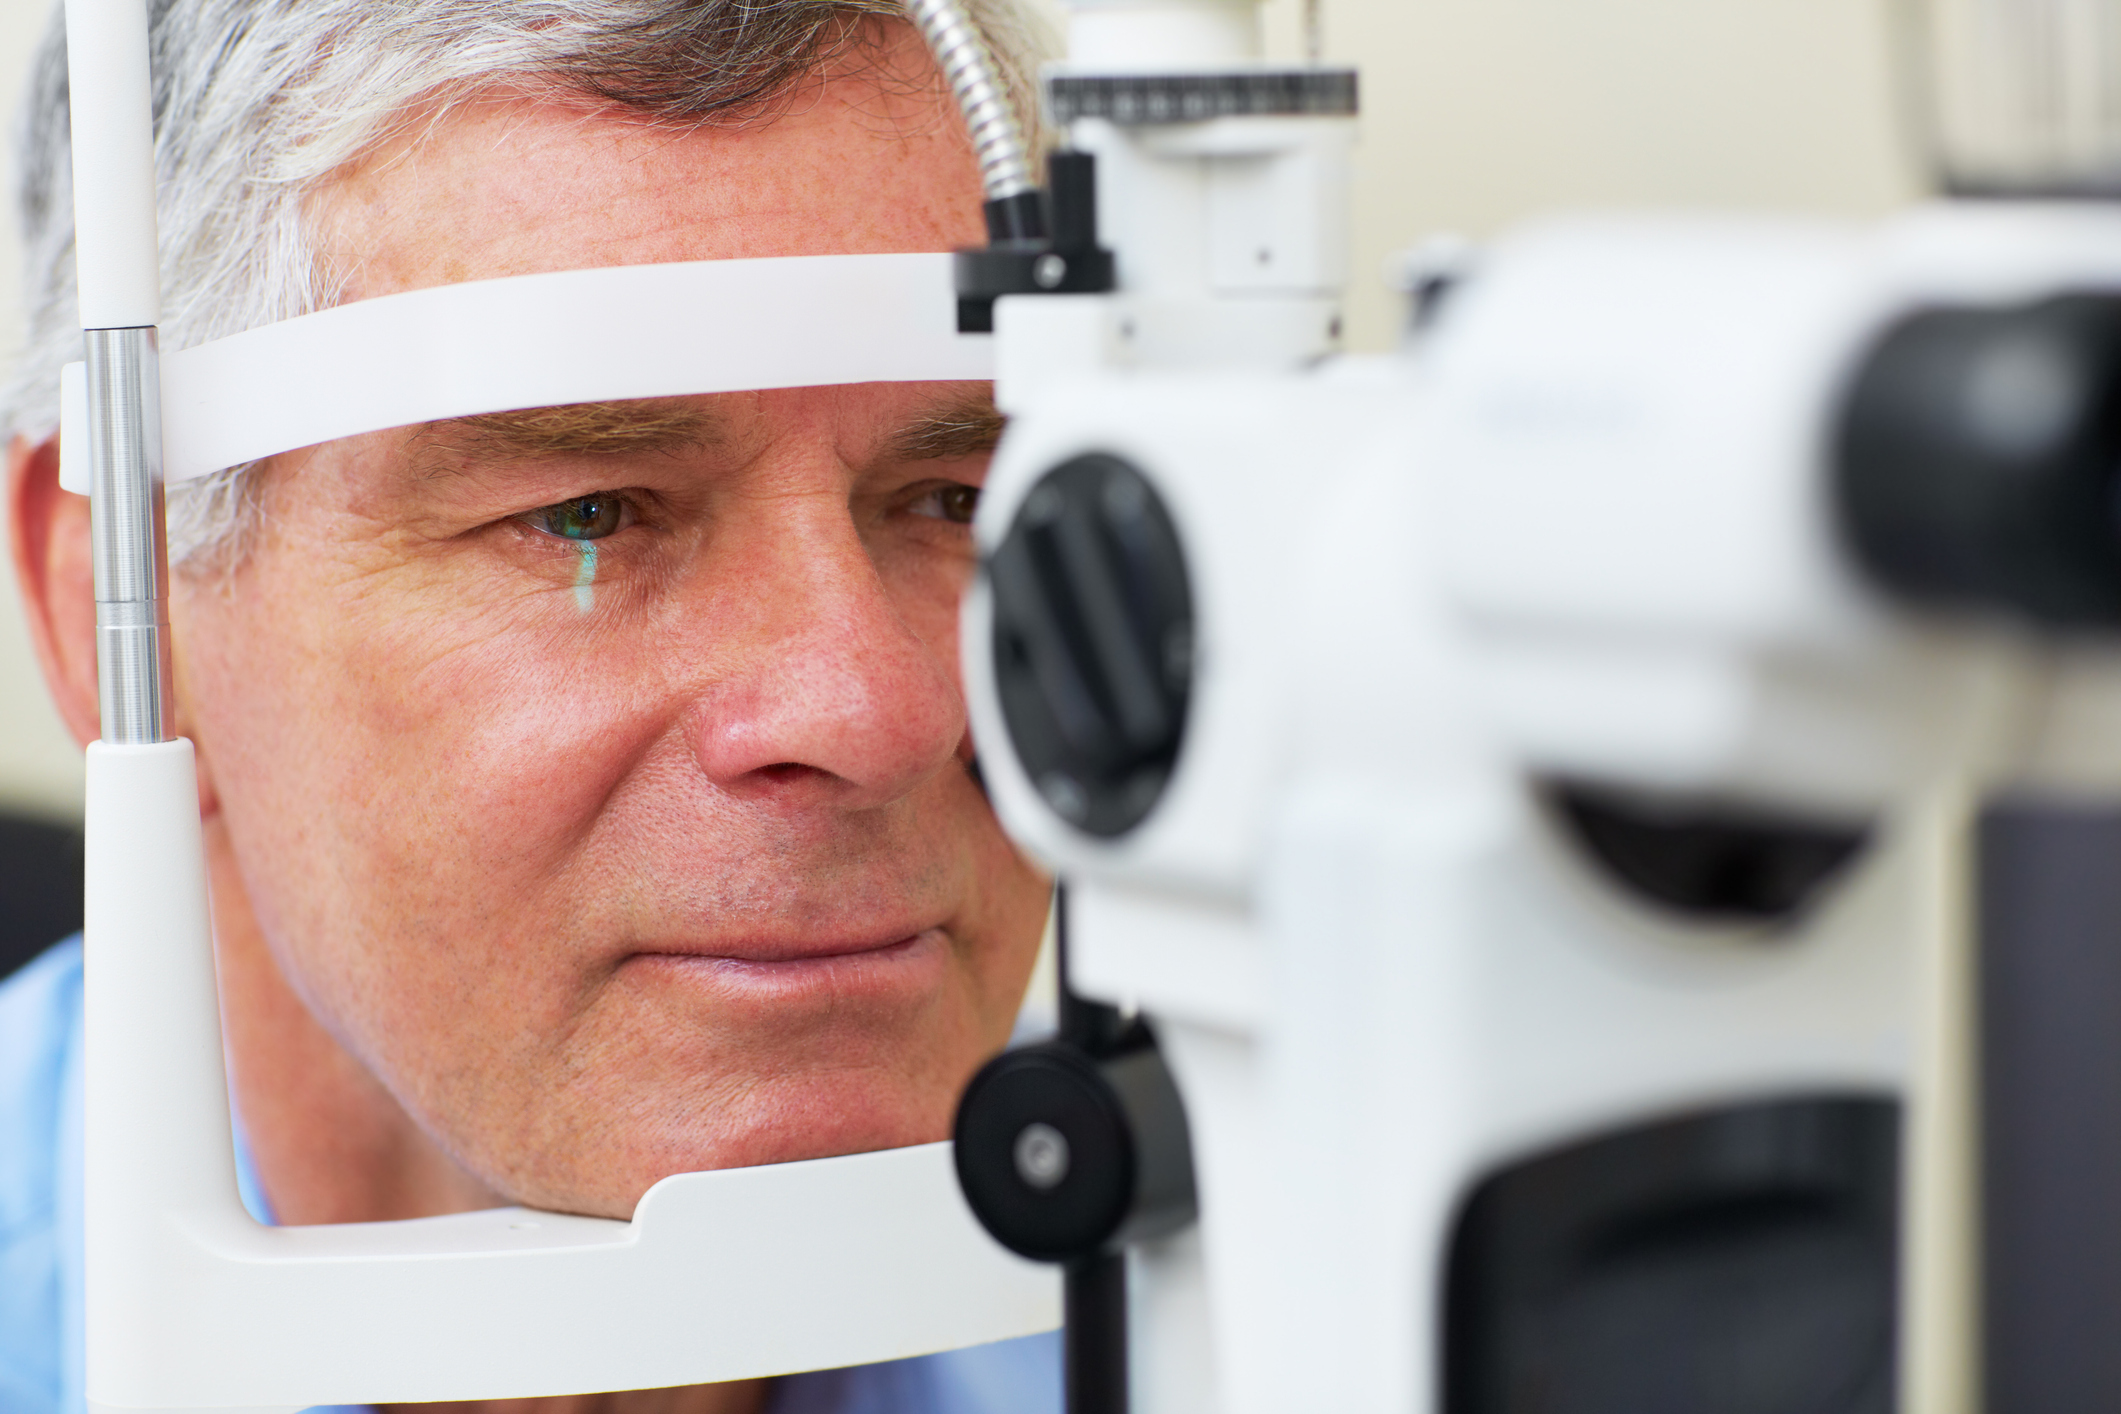 Middle aged man undergoing an eye test